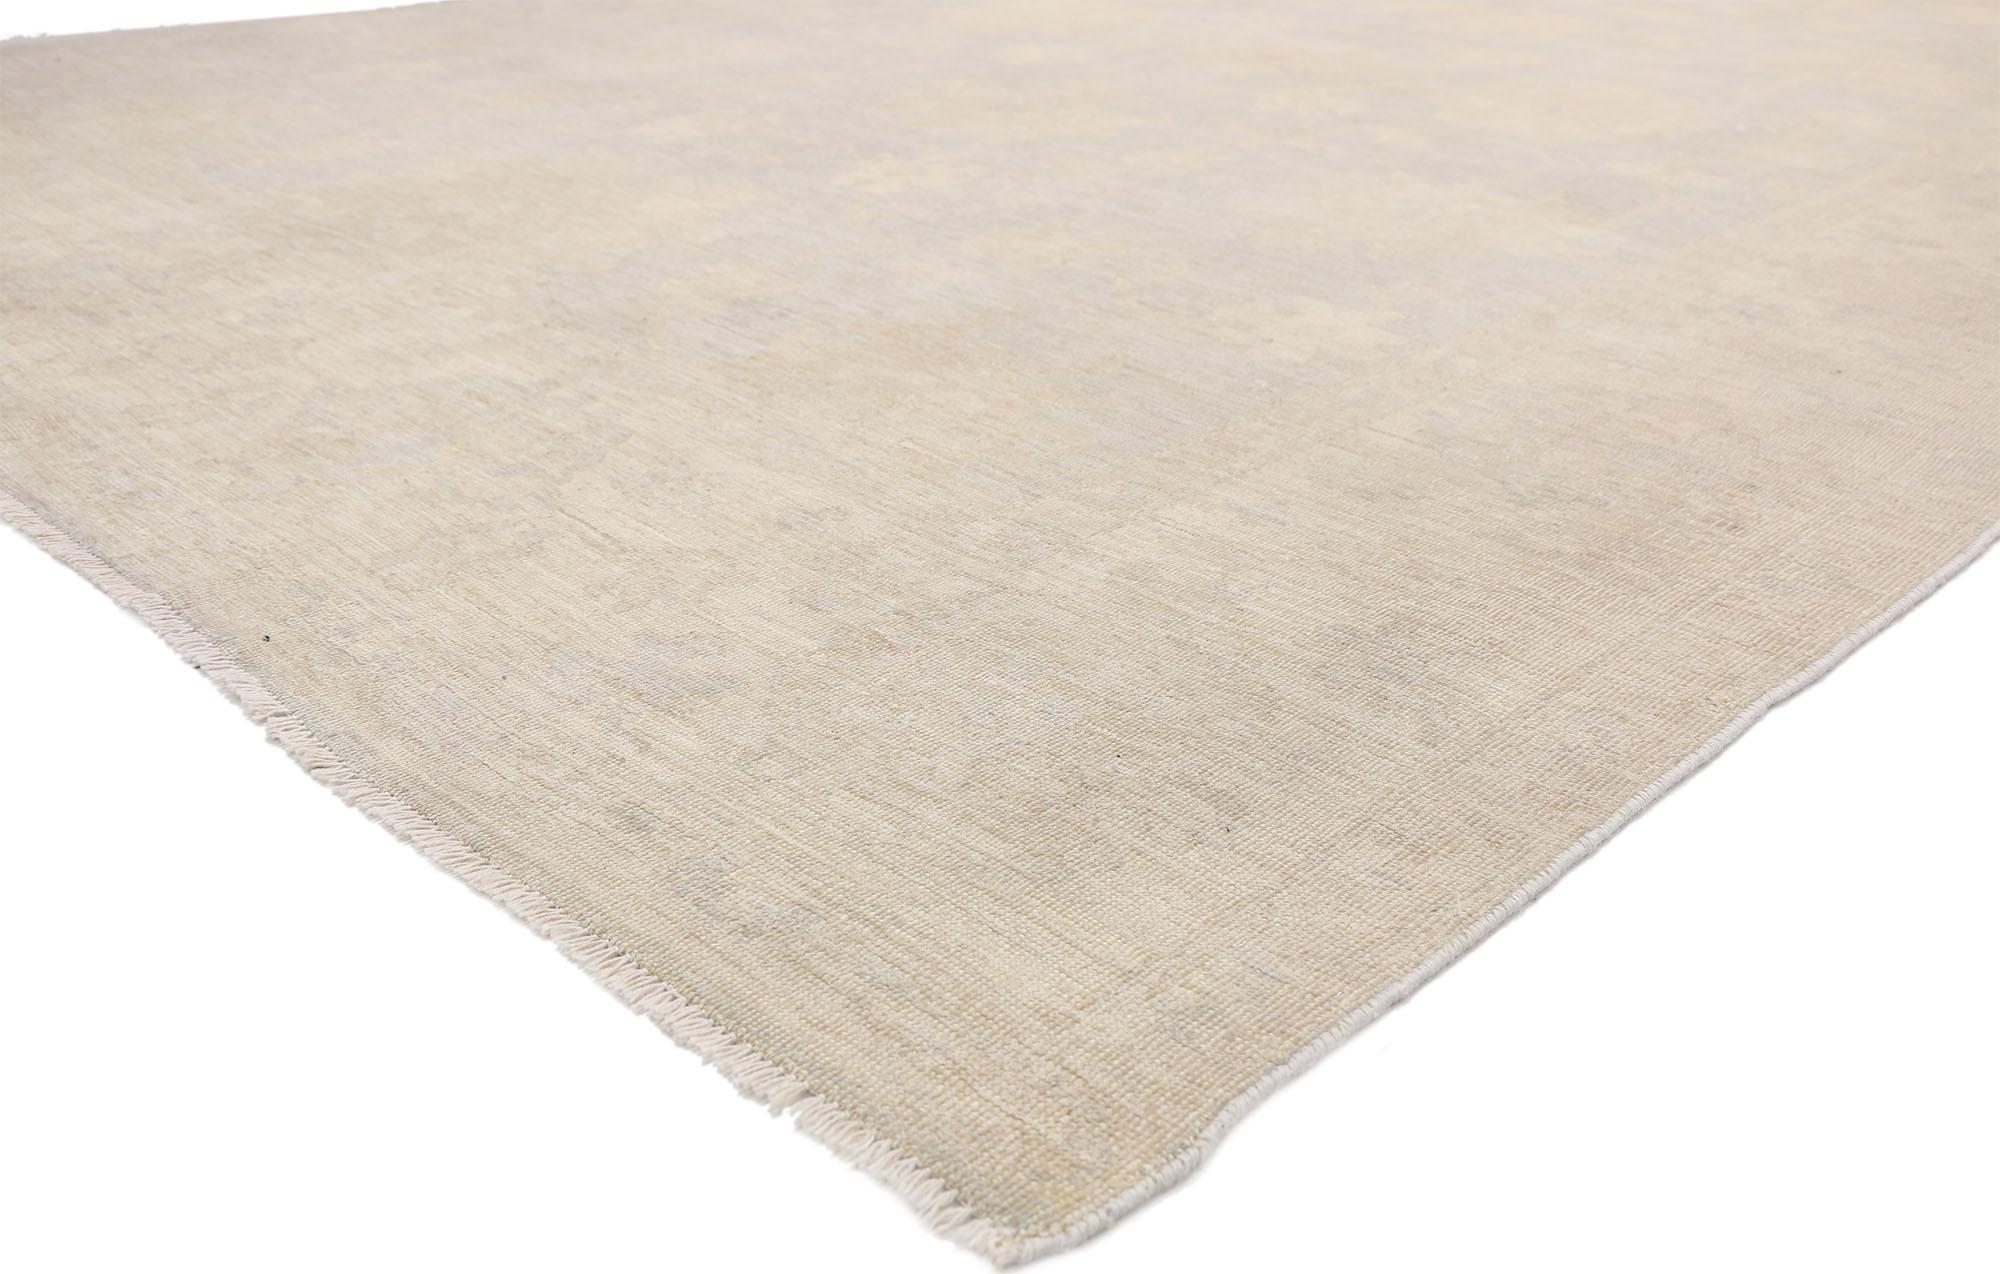 80193, new contemporary Oushak area rug with transitional beach house coastal style. Blending elements from the modern world with gracious gray hues, this hand knotted wool contemporary Turkish Oushak rug will boost the coziness factor in nearly any